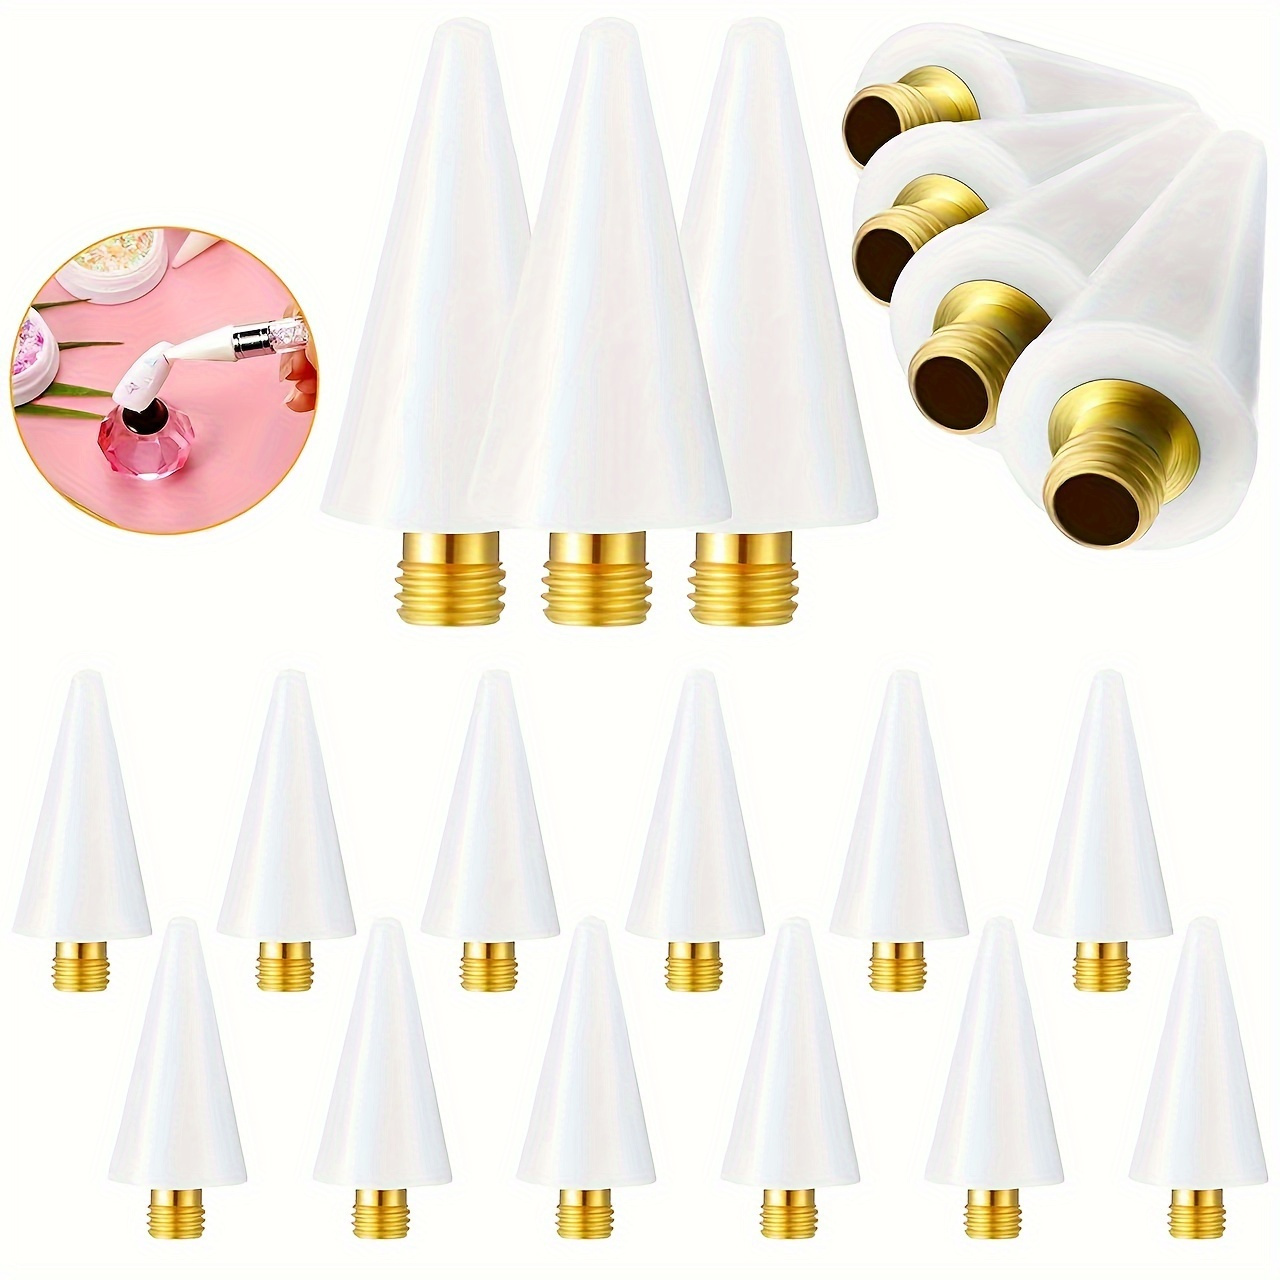 

10-piece Dual-ended Nail Art Wax Pens - Rhinestone Pickup & Application Tool With Adhesive Drill Release, Odorless Manicure Accessories